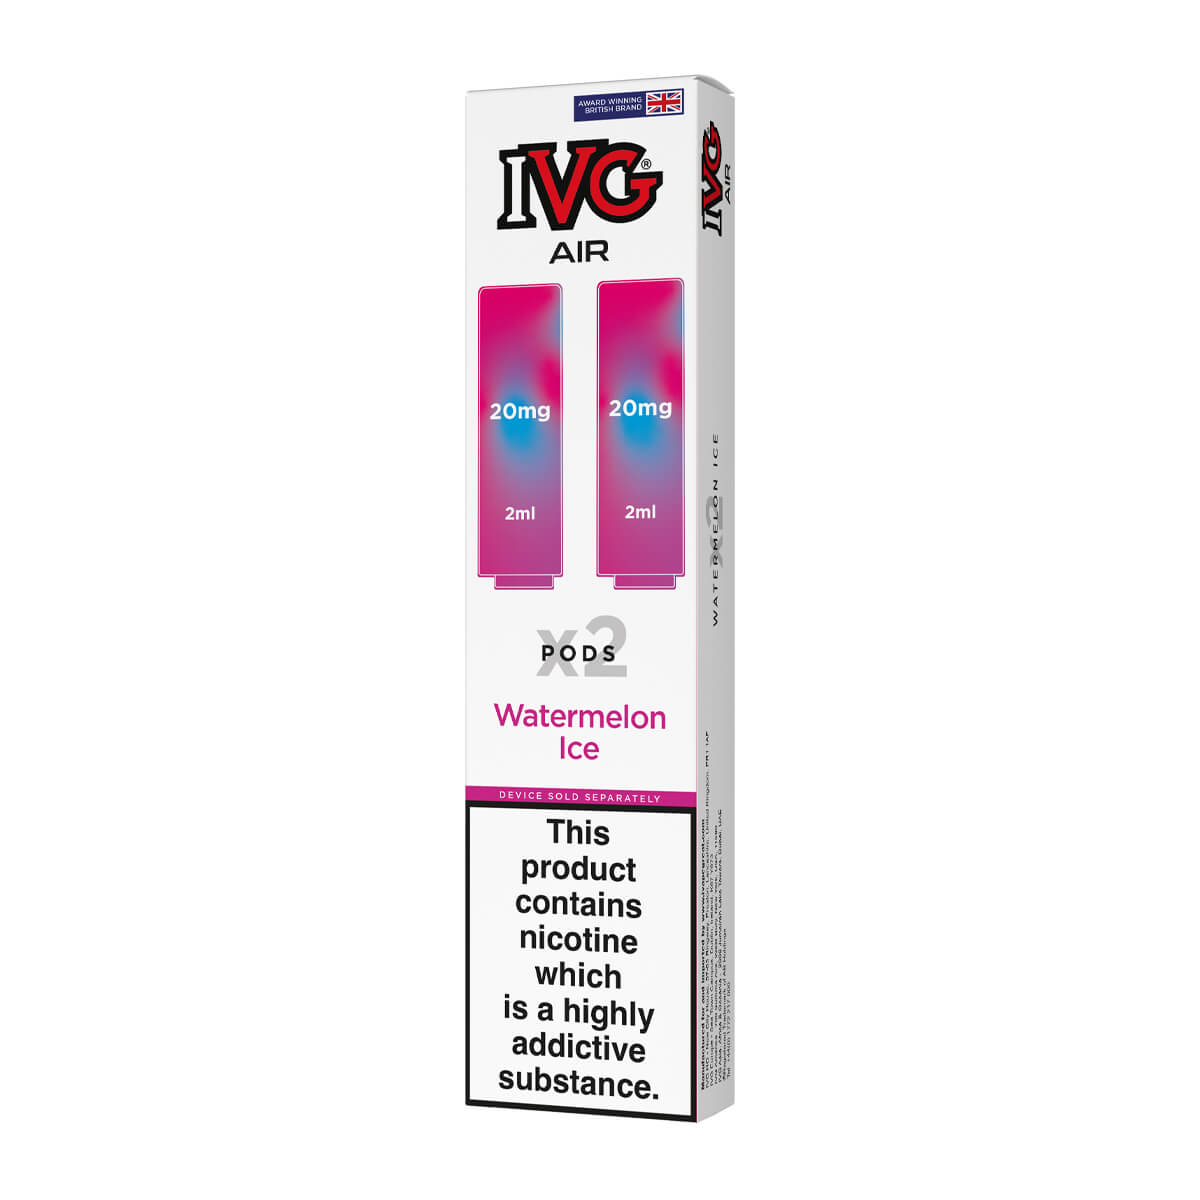 Watermelon Ice IVG Air Prefilled Pods